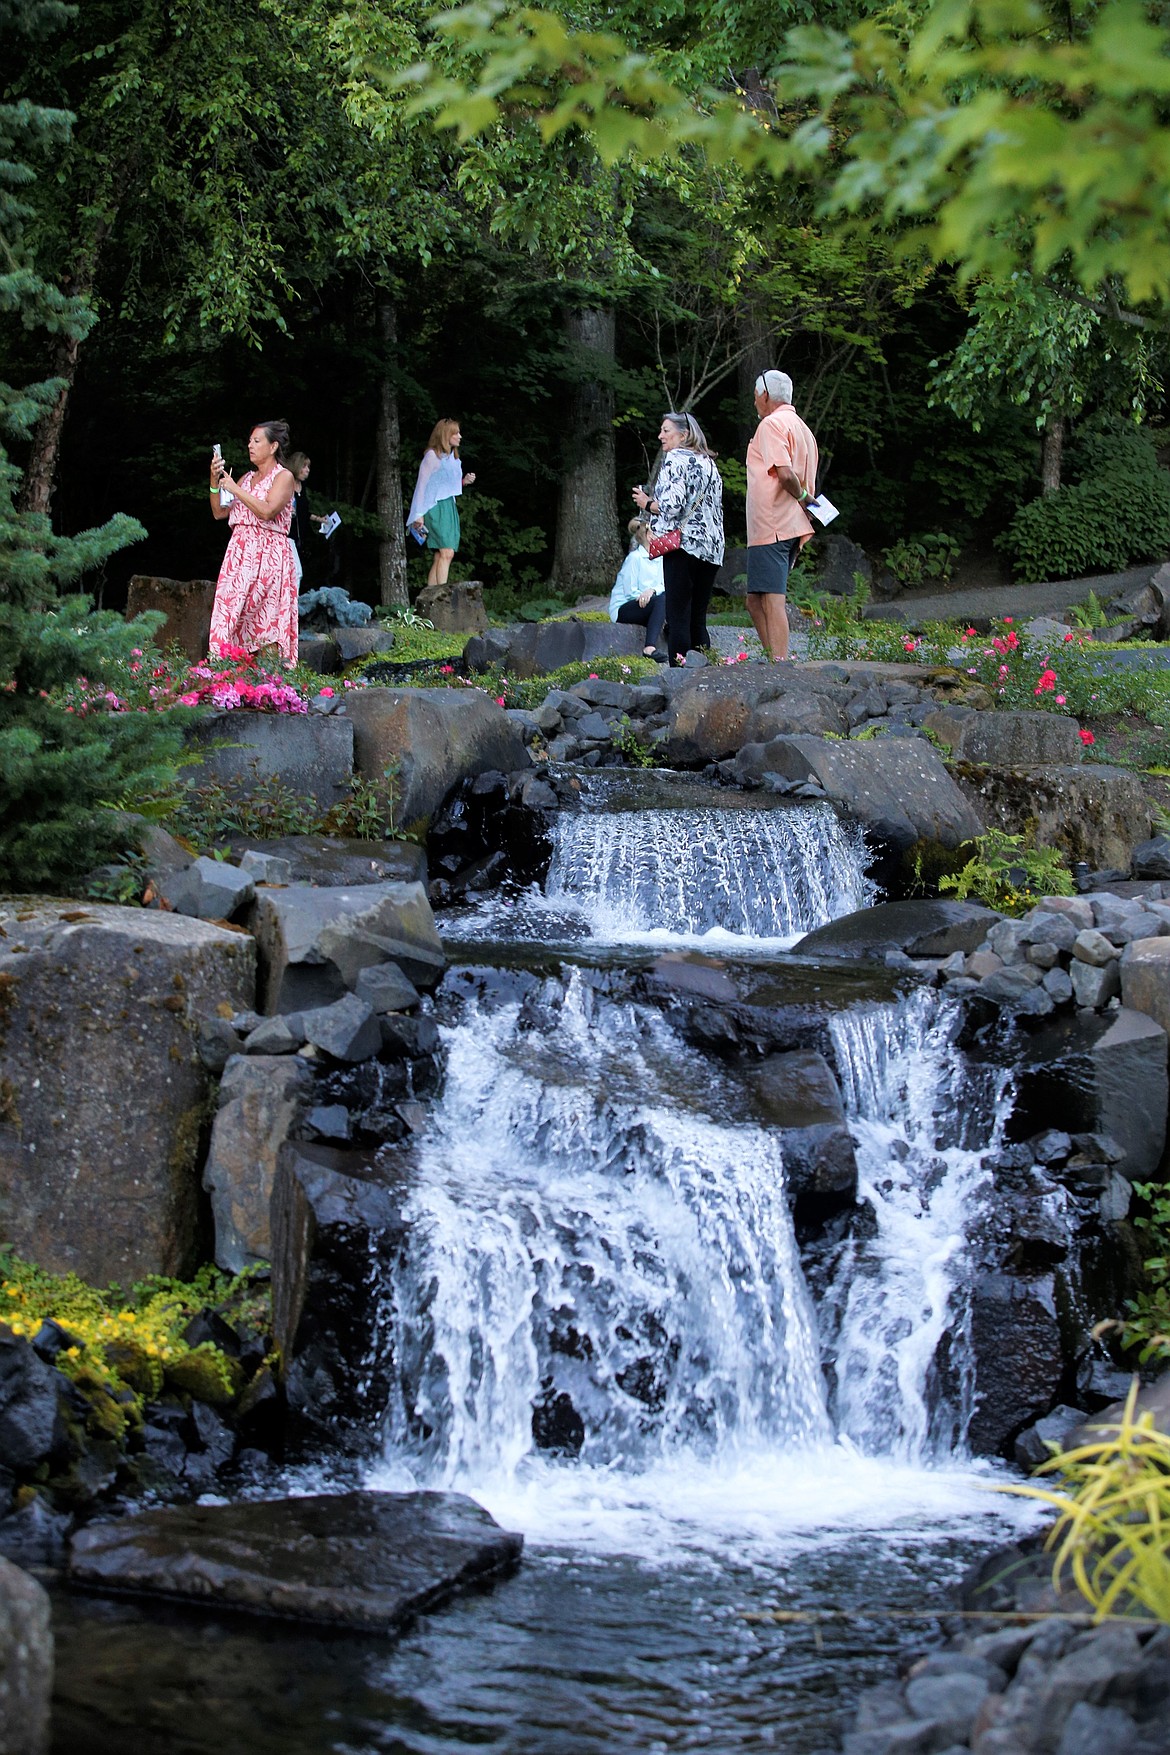 Guests stand near a waterfall at Hagadone Gardens on Tuesday.